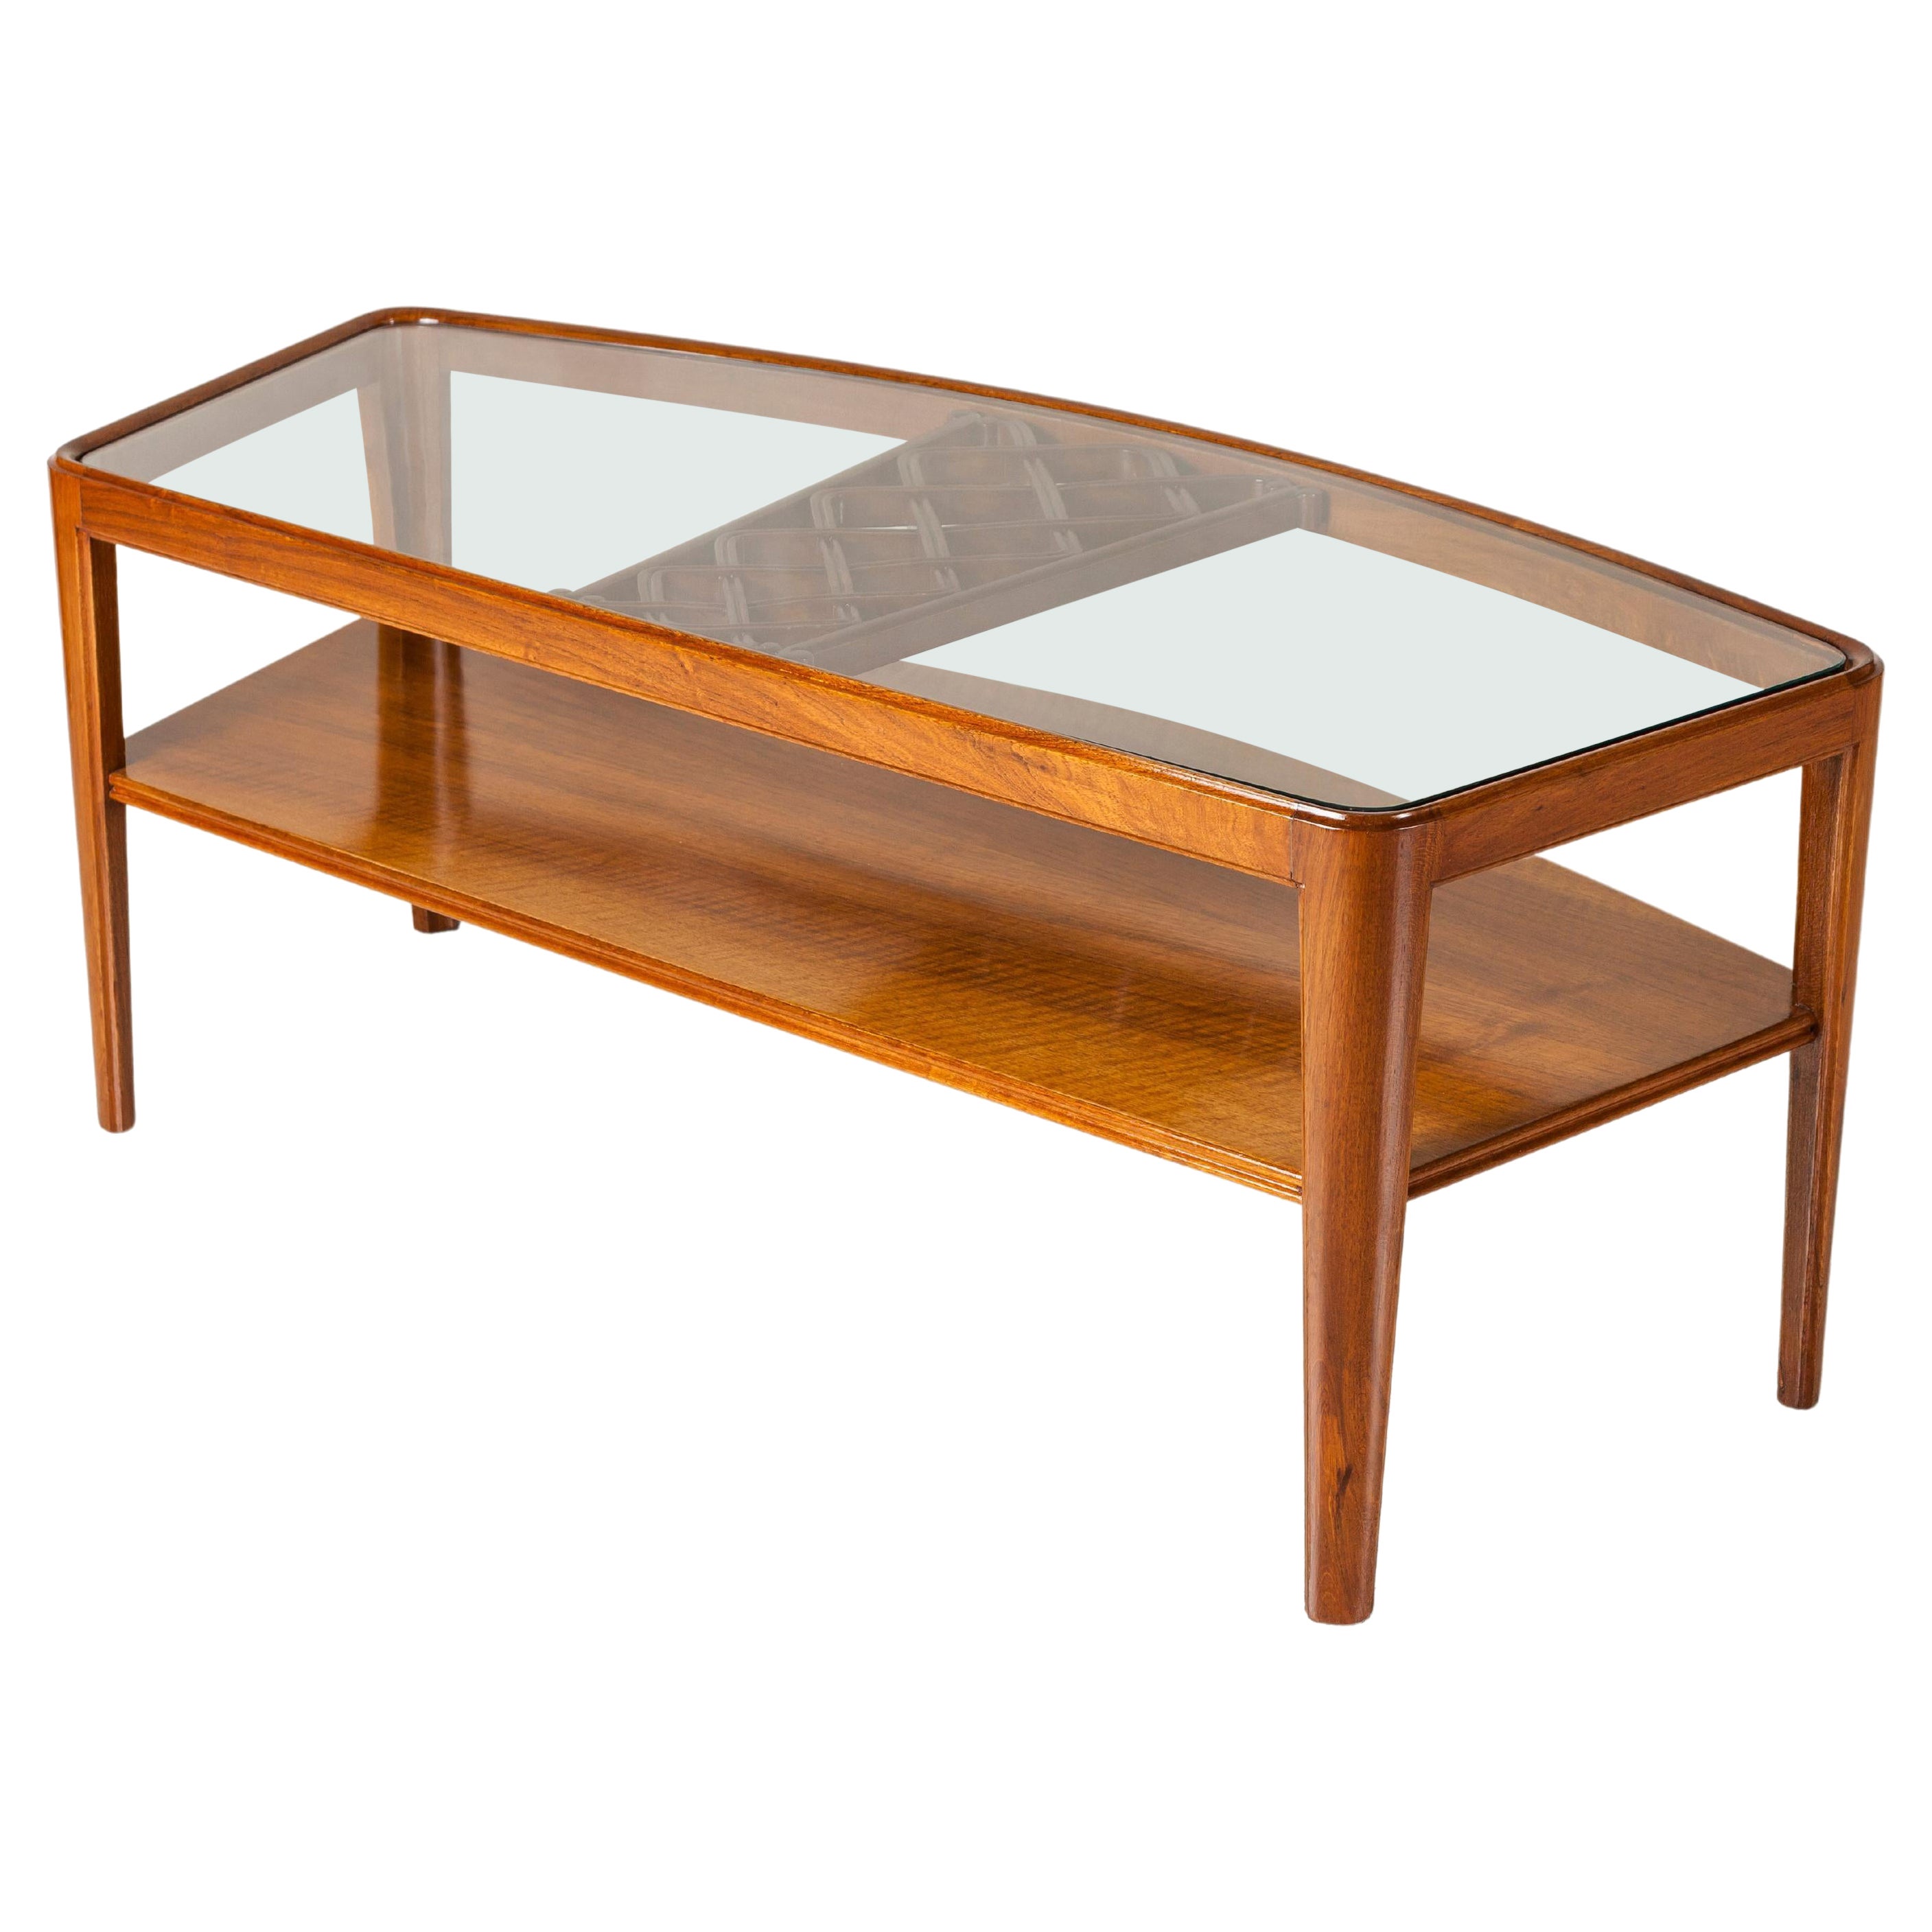 Wood and Glass Low Table by Englander & Bonta, Argentina, circa 1950 For Sale